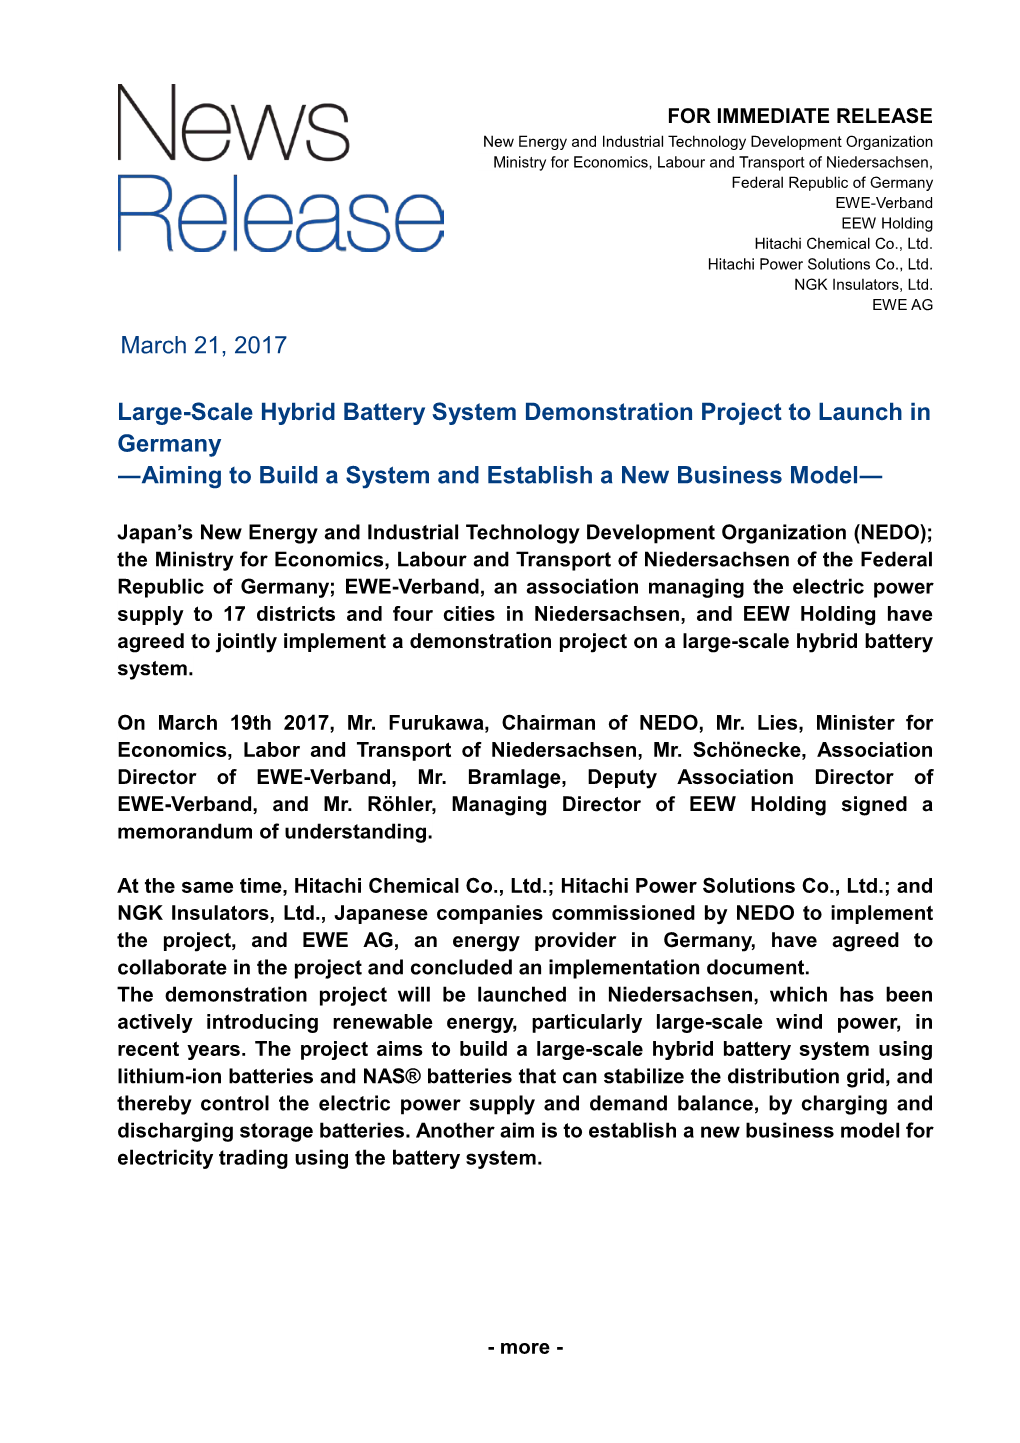 Large-Scale Hybrid Battery System Demonstration Project to Launch in Germany ―Aiming to Build a System and Establish a New Business Model―